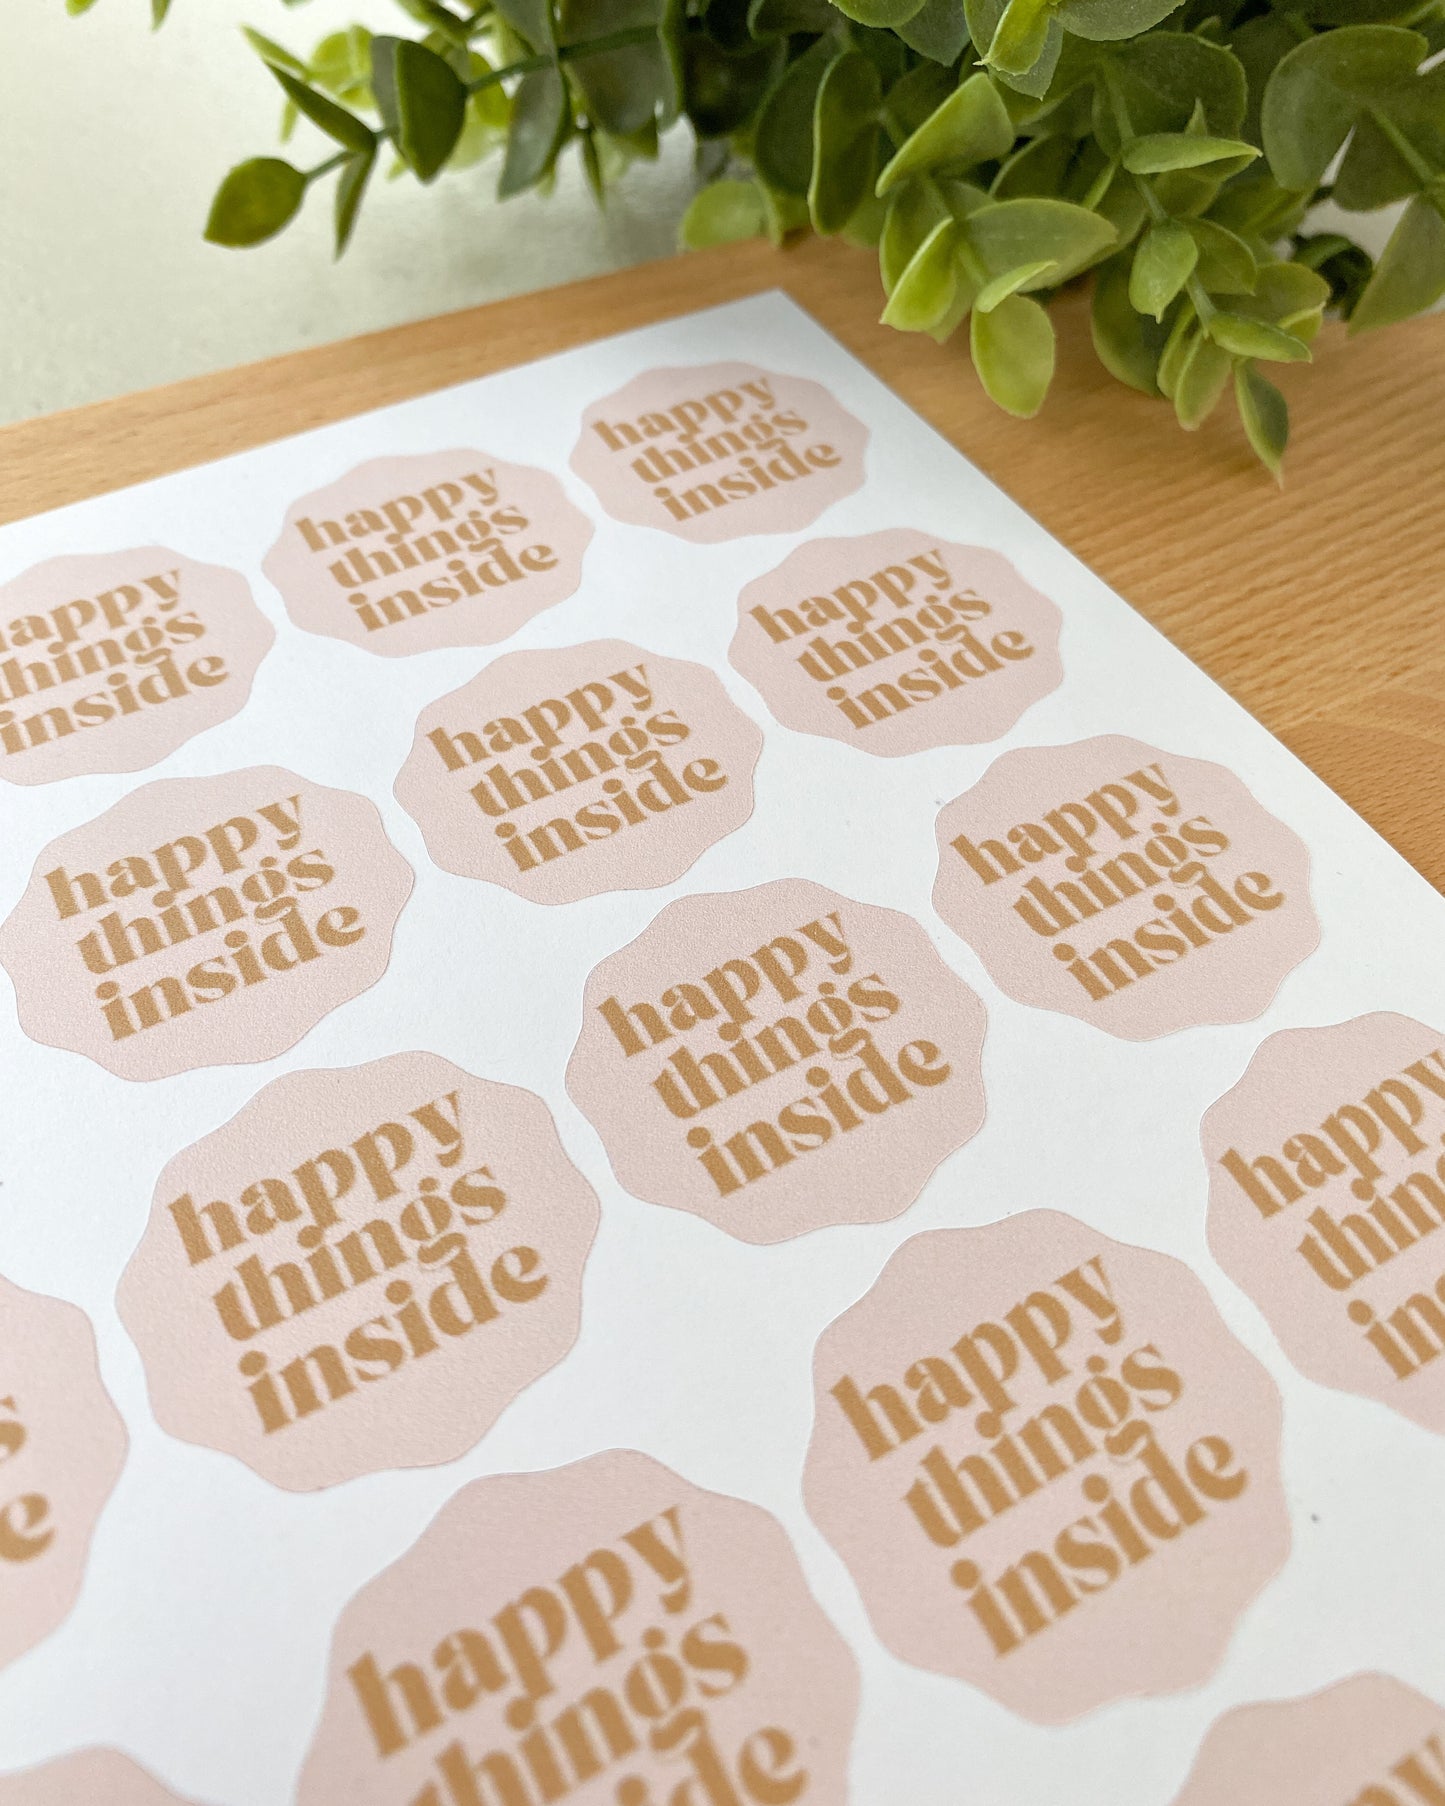 Happy Things Inside Packaging Sticker Sheets